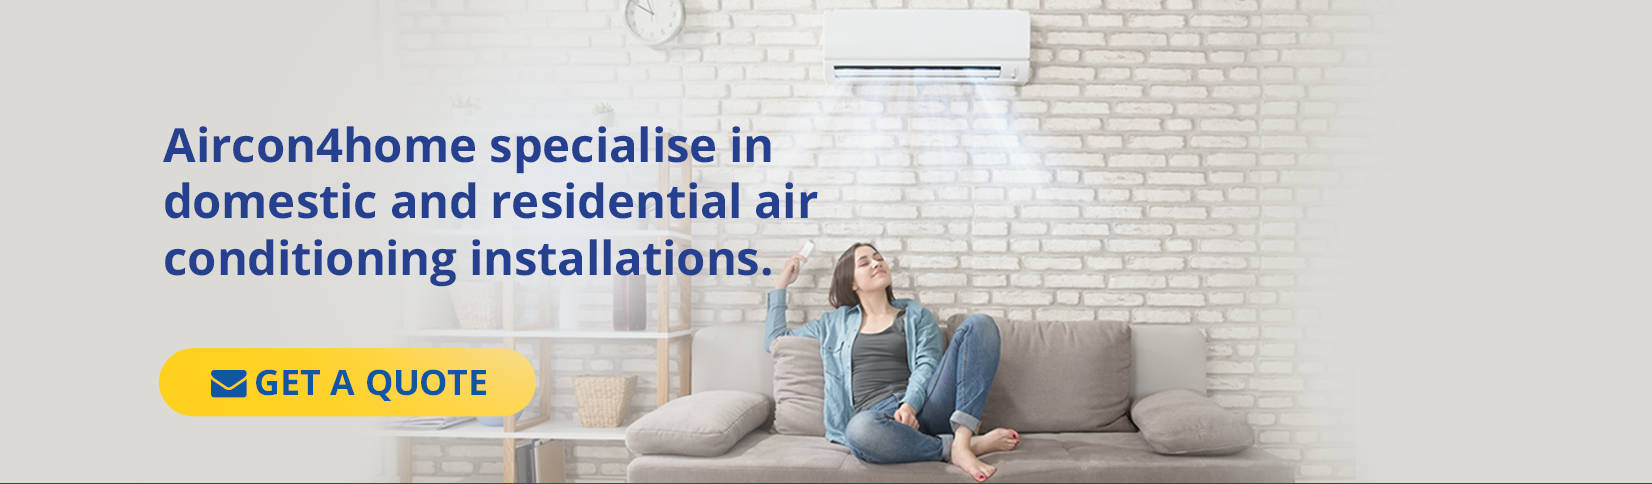 aircon4home air conditioning systems